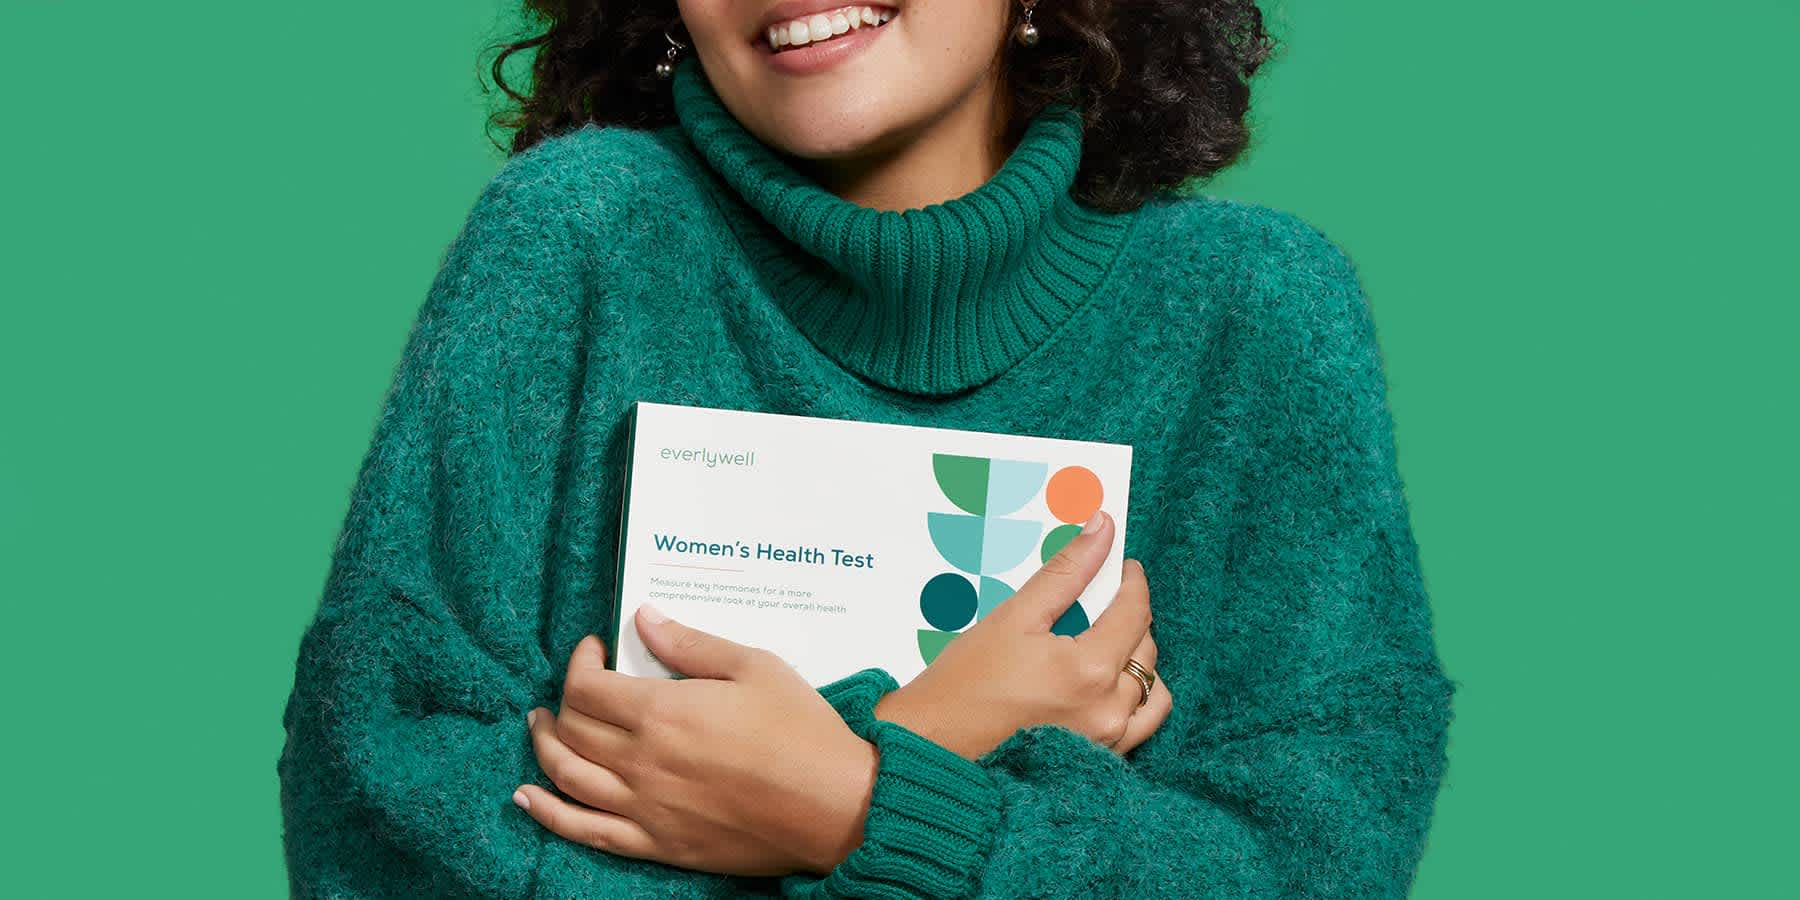 Woman holding an Everlywell Women's Health Test box close to her against a green background